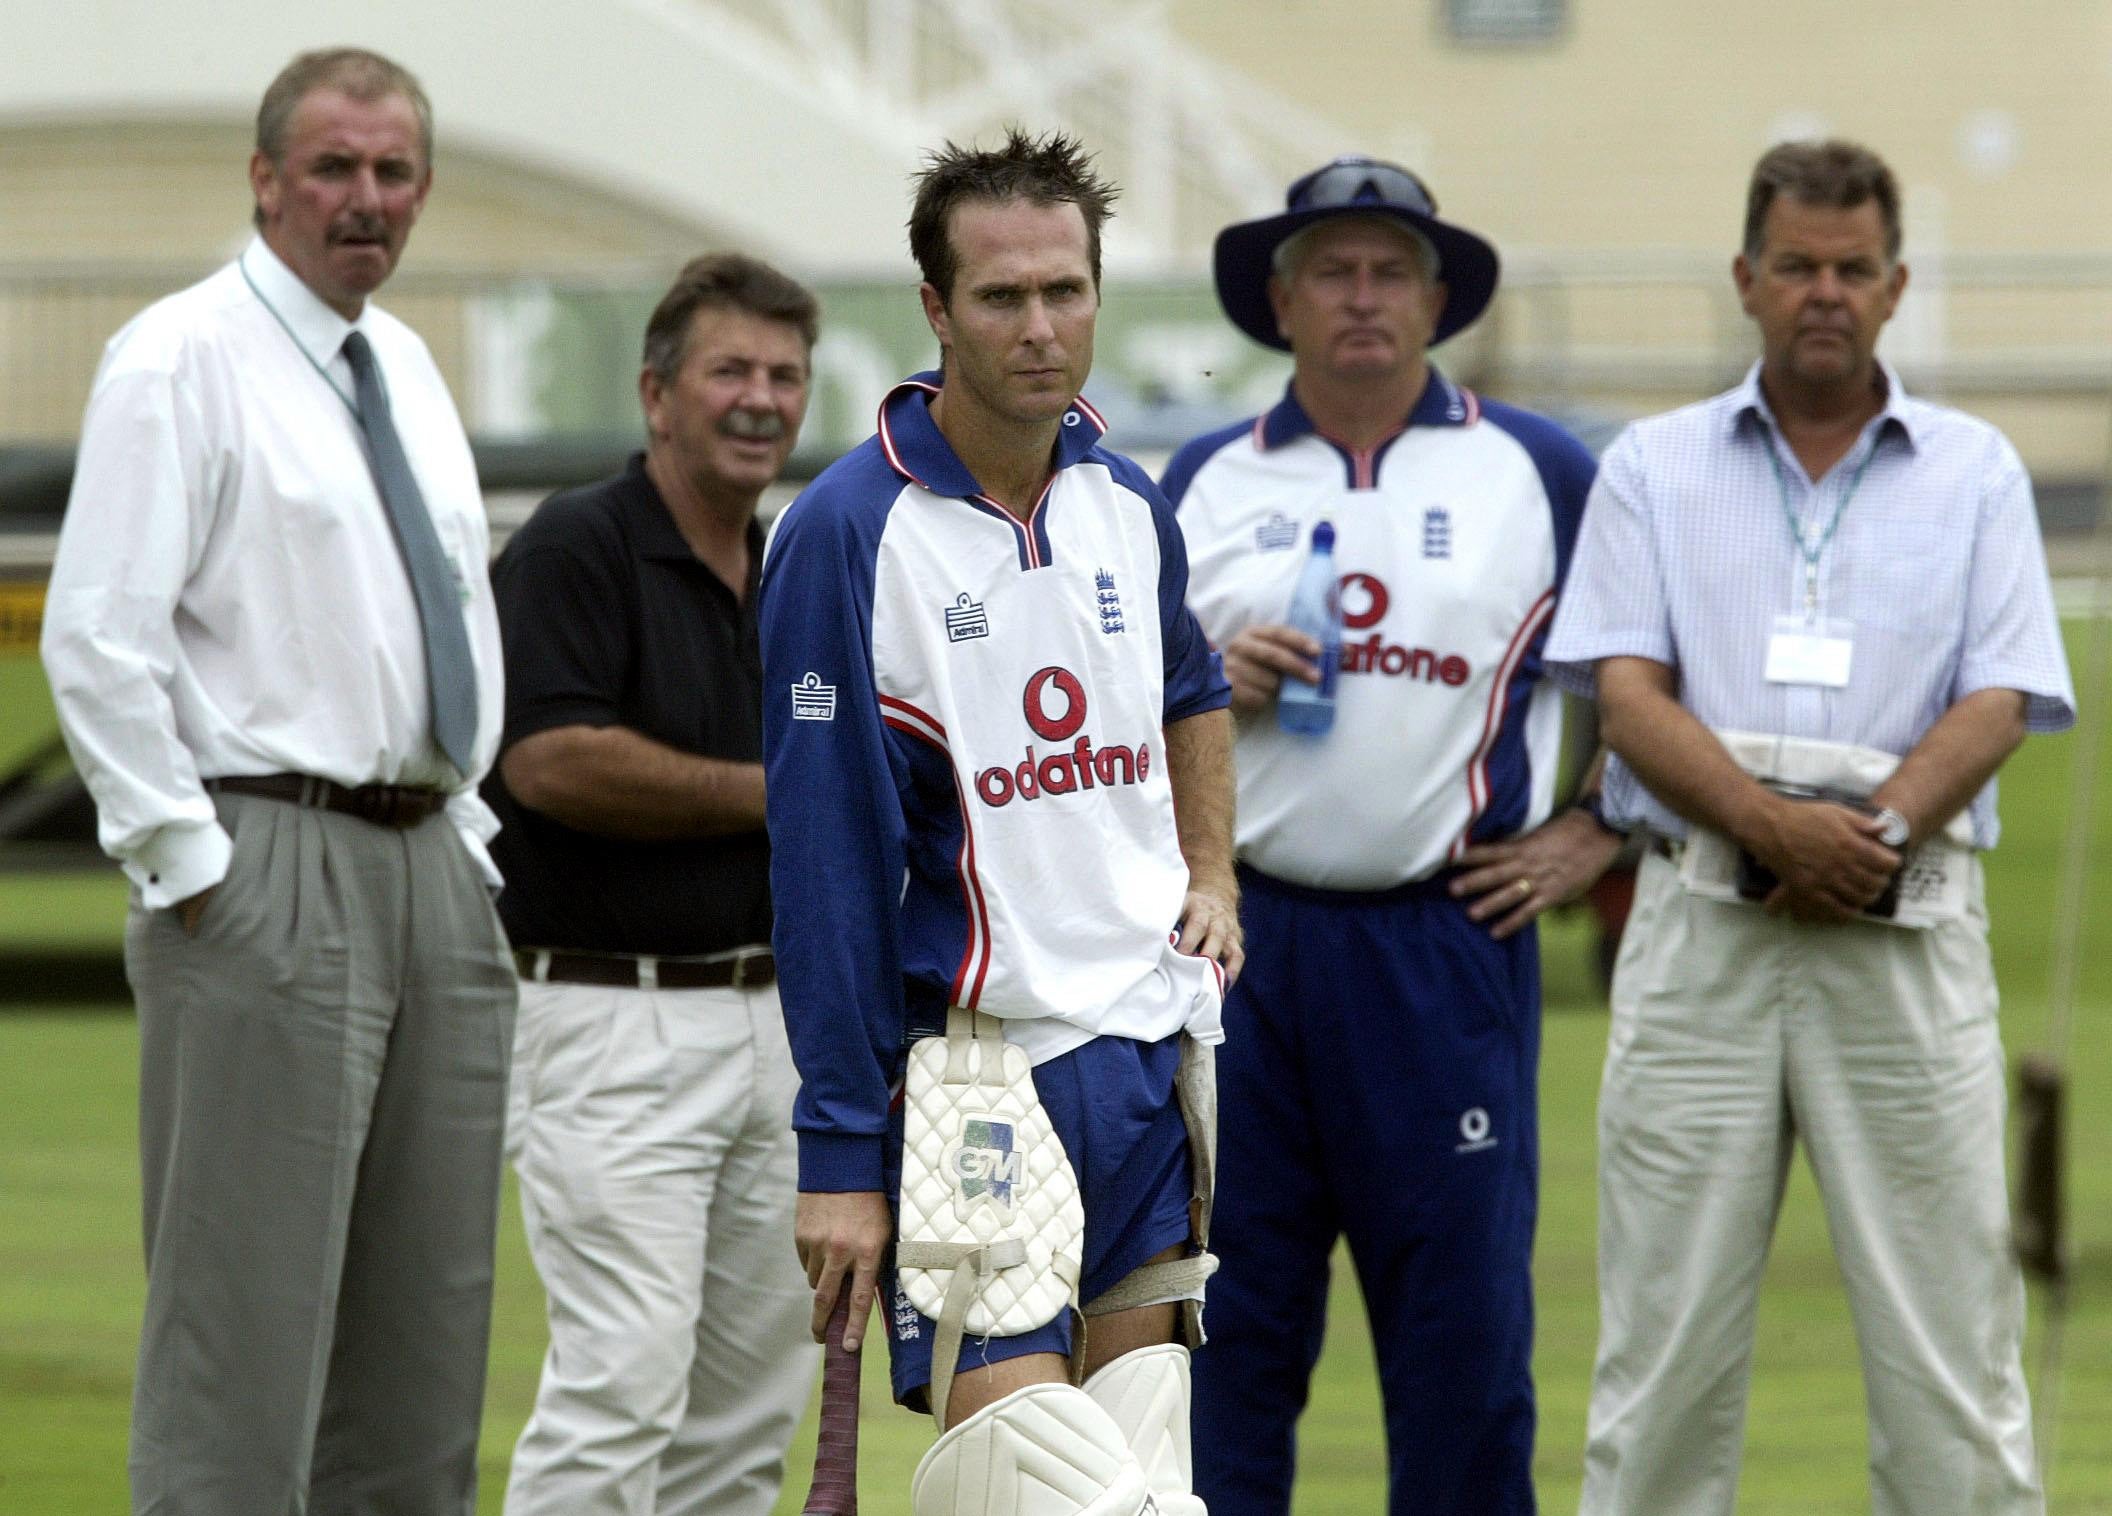 England captain Michael Vaughan with Marsh (second left) behind him in Nottingham (PA)